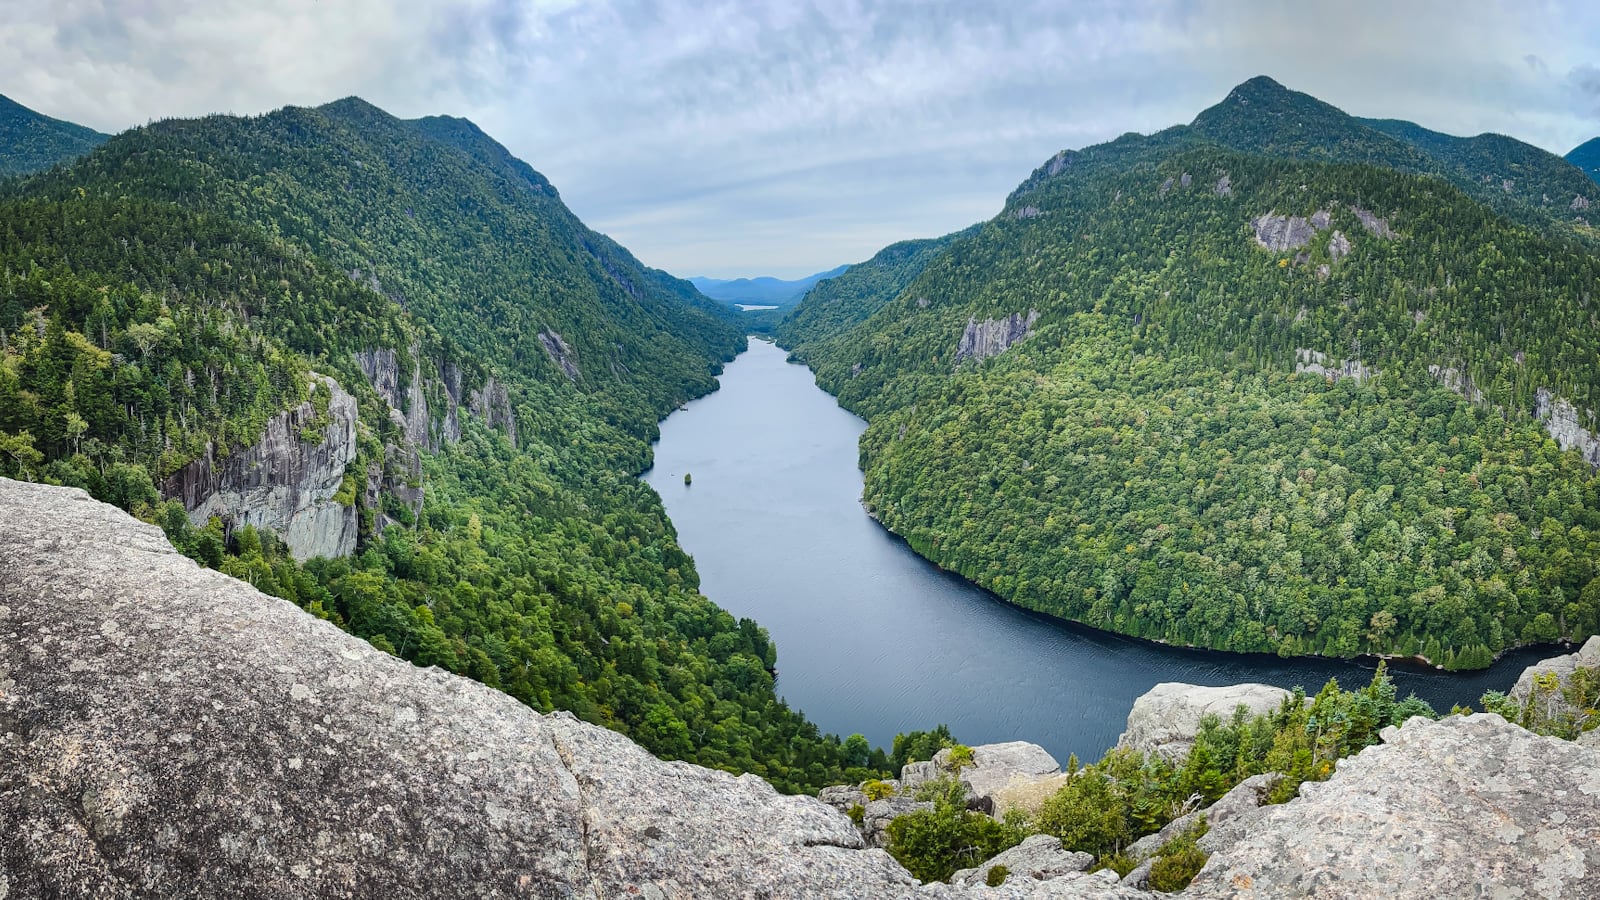 View of Ausable Lakes from Indian Head in the Adirondacks